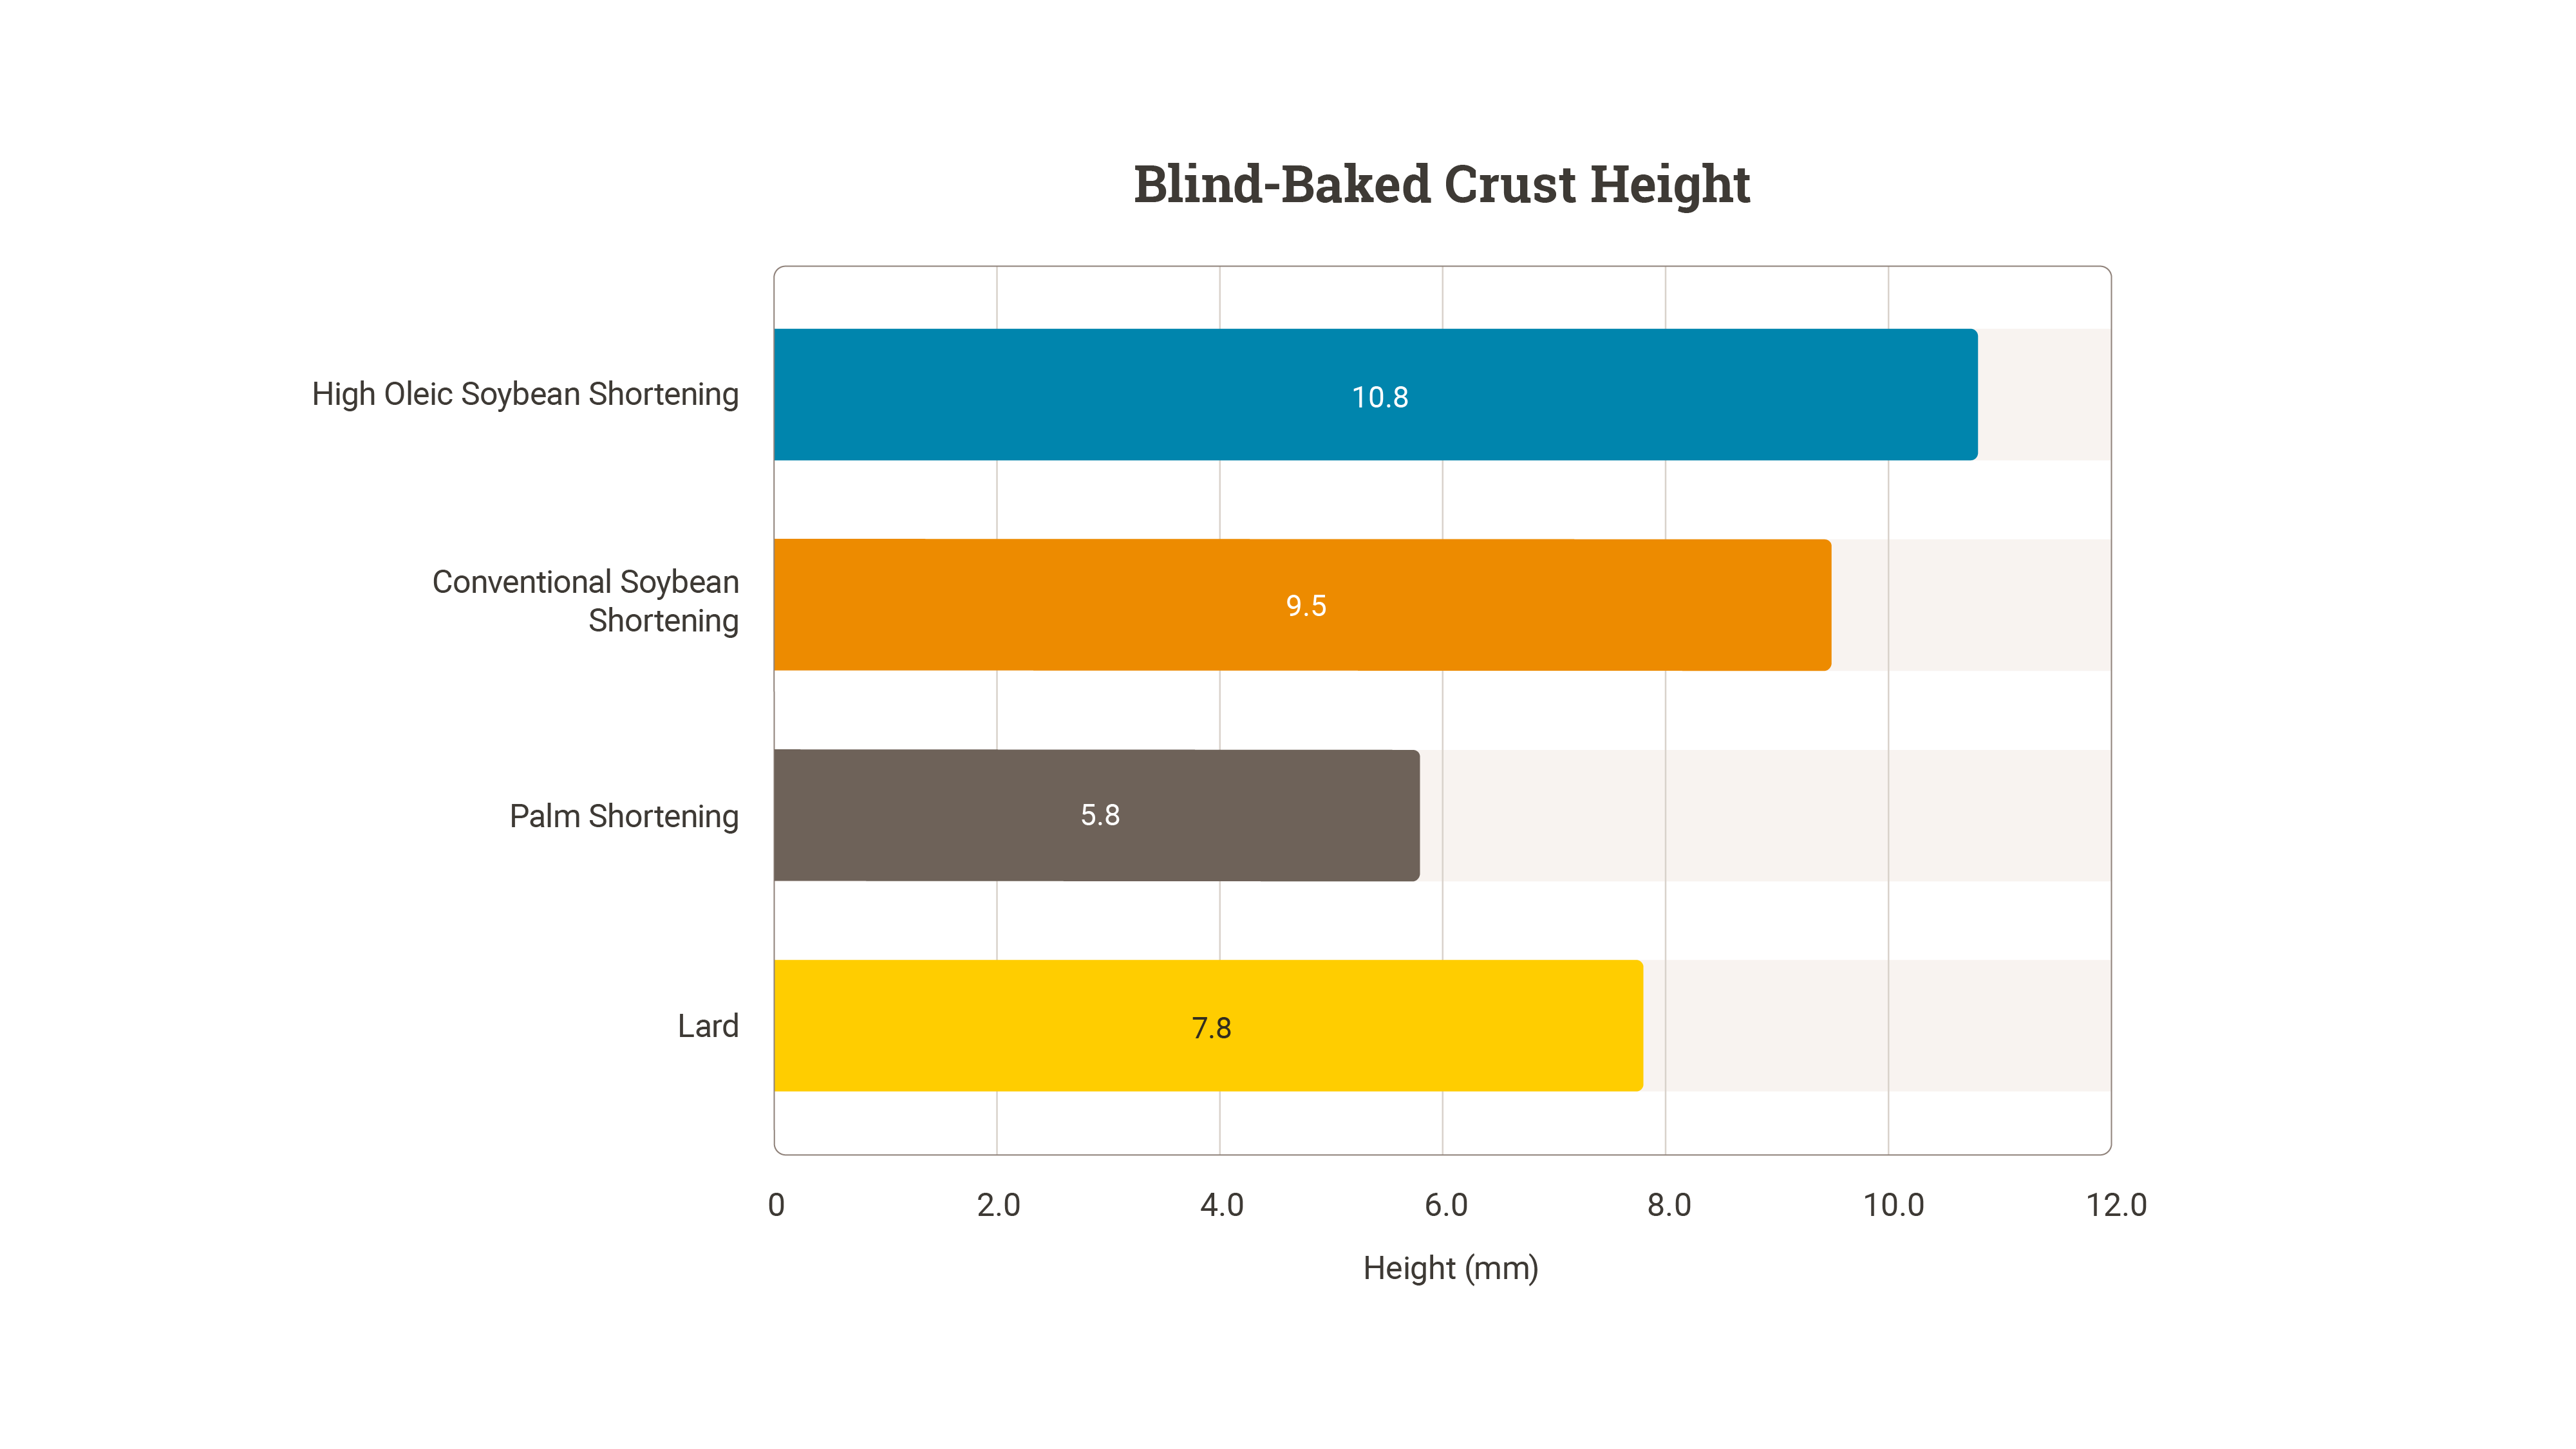 Blind-Baked Crust Height